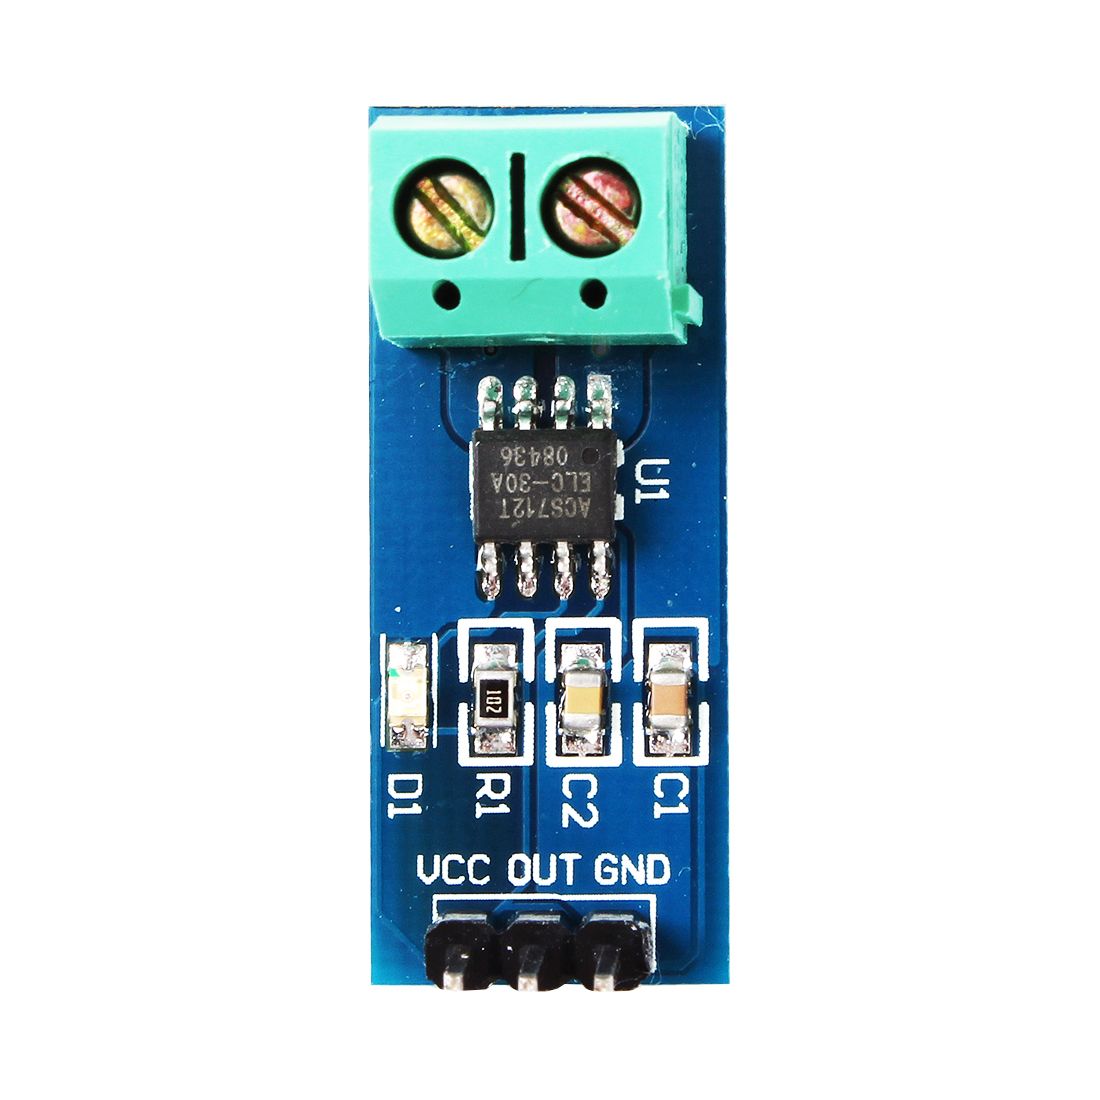 20pcs-5V-30A-ACS712-Ranging-Current-Sensor-Module-Board-Geekcreit-for-Arduino---products-that-work-w-1388404